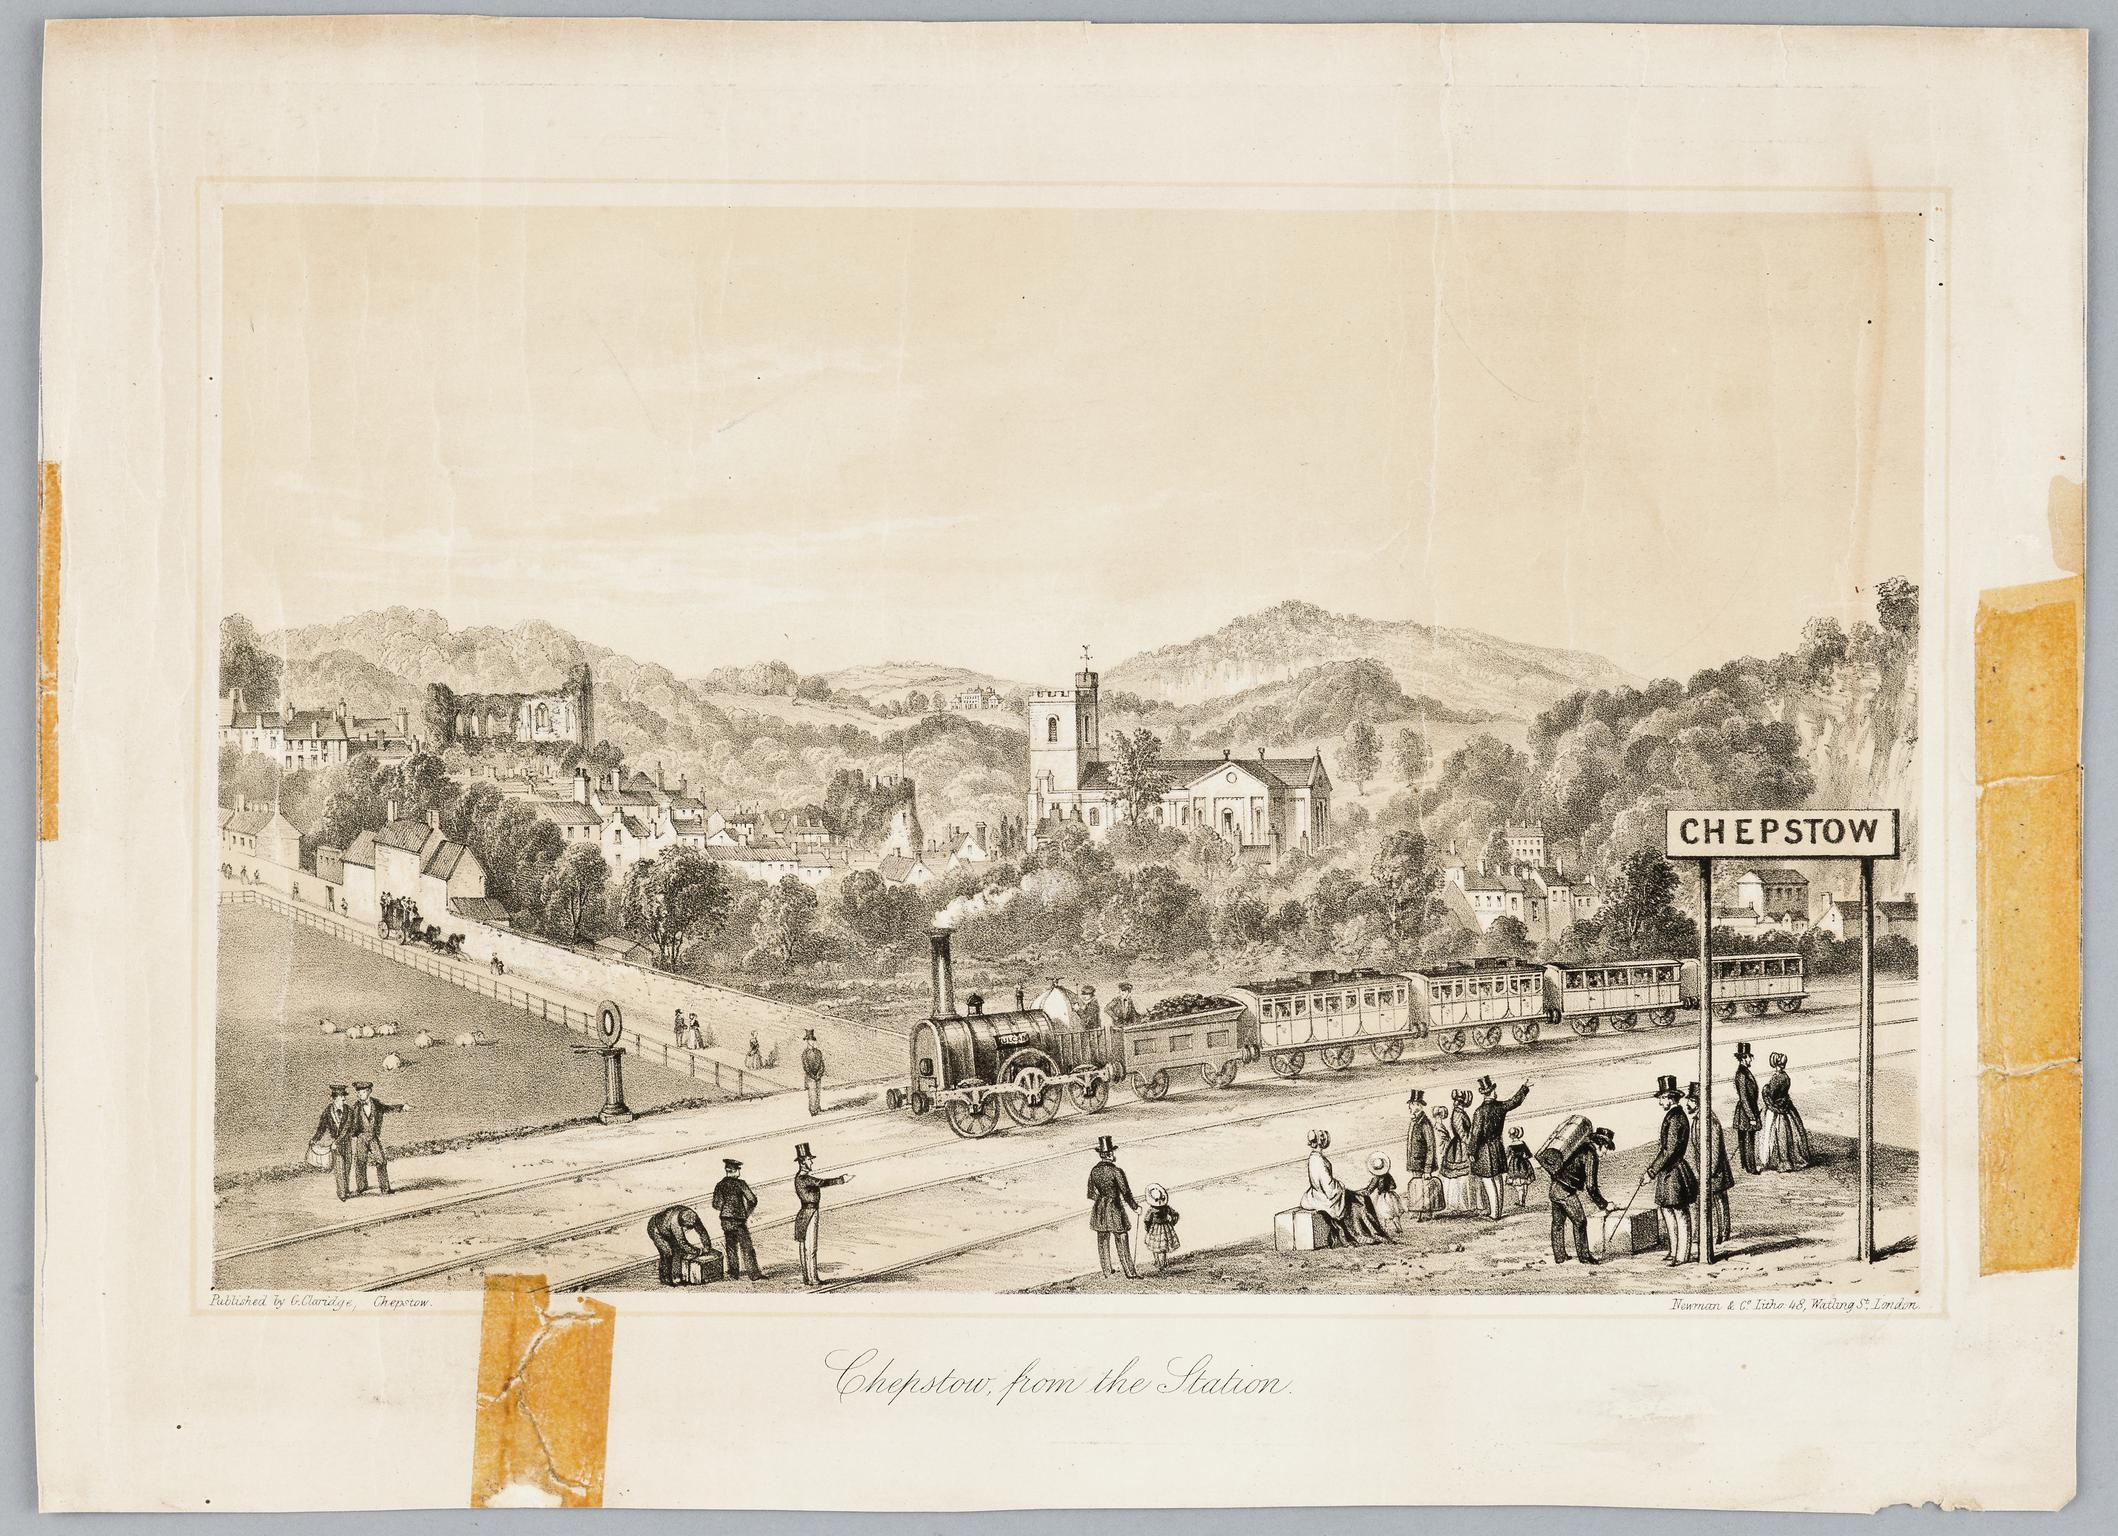 Chepstow from the Station (print)